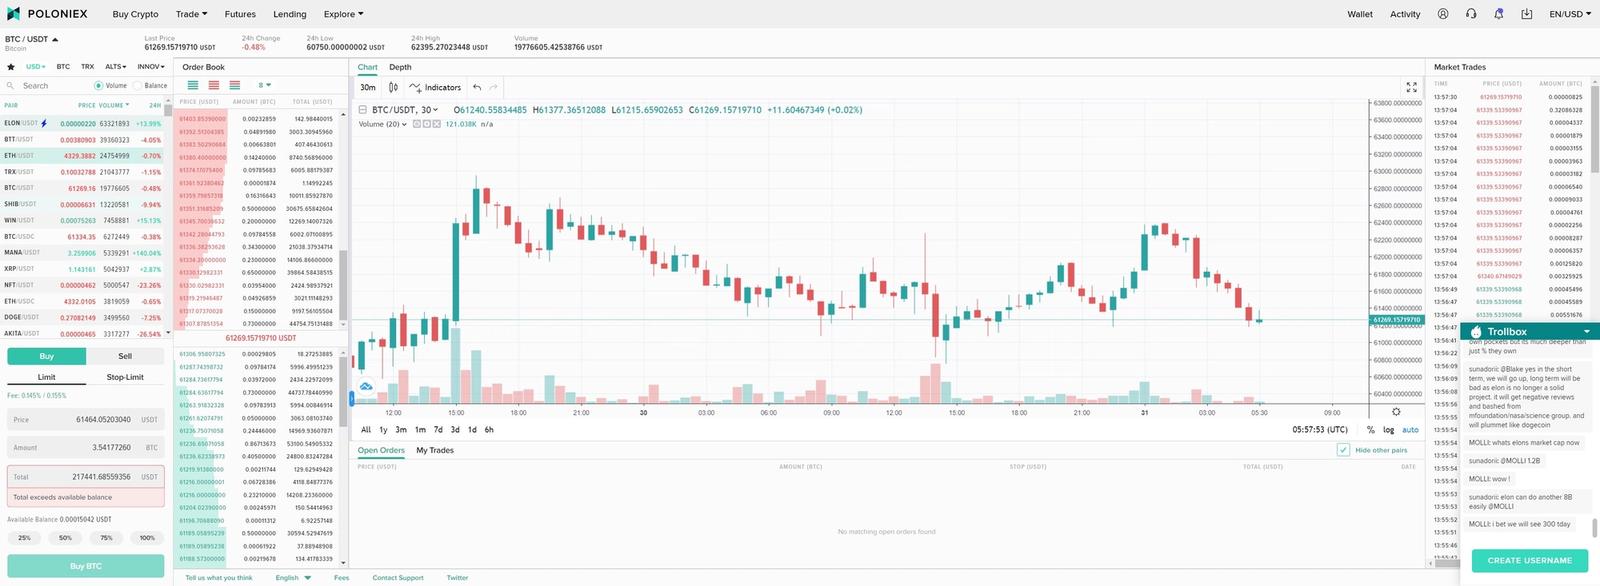 Poloniex user interface for trading